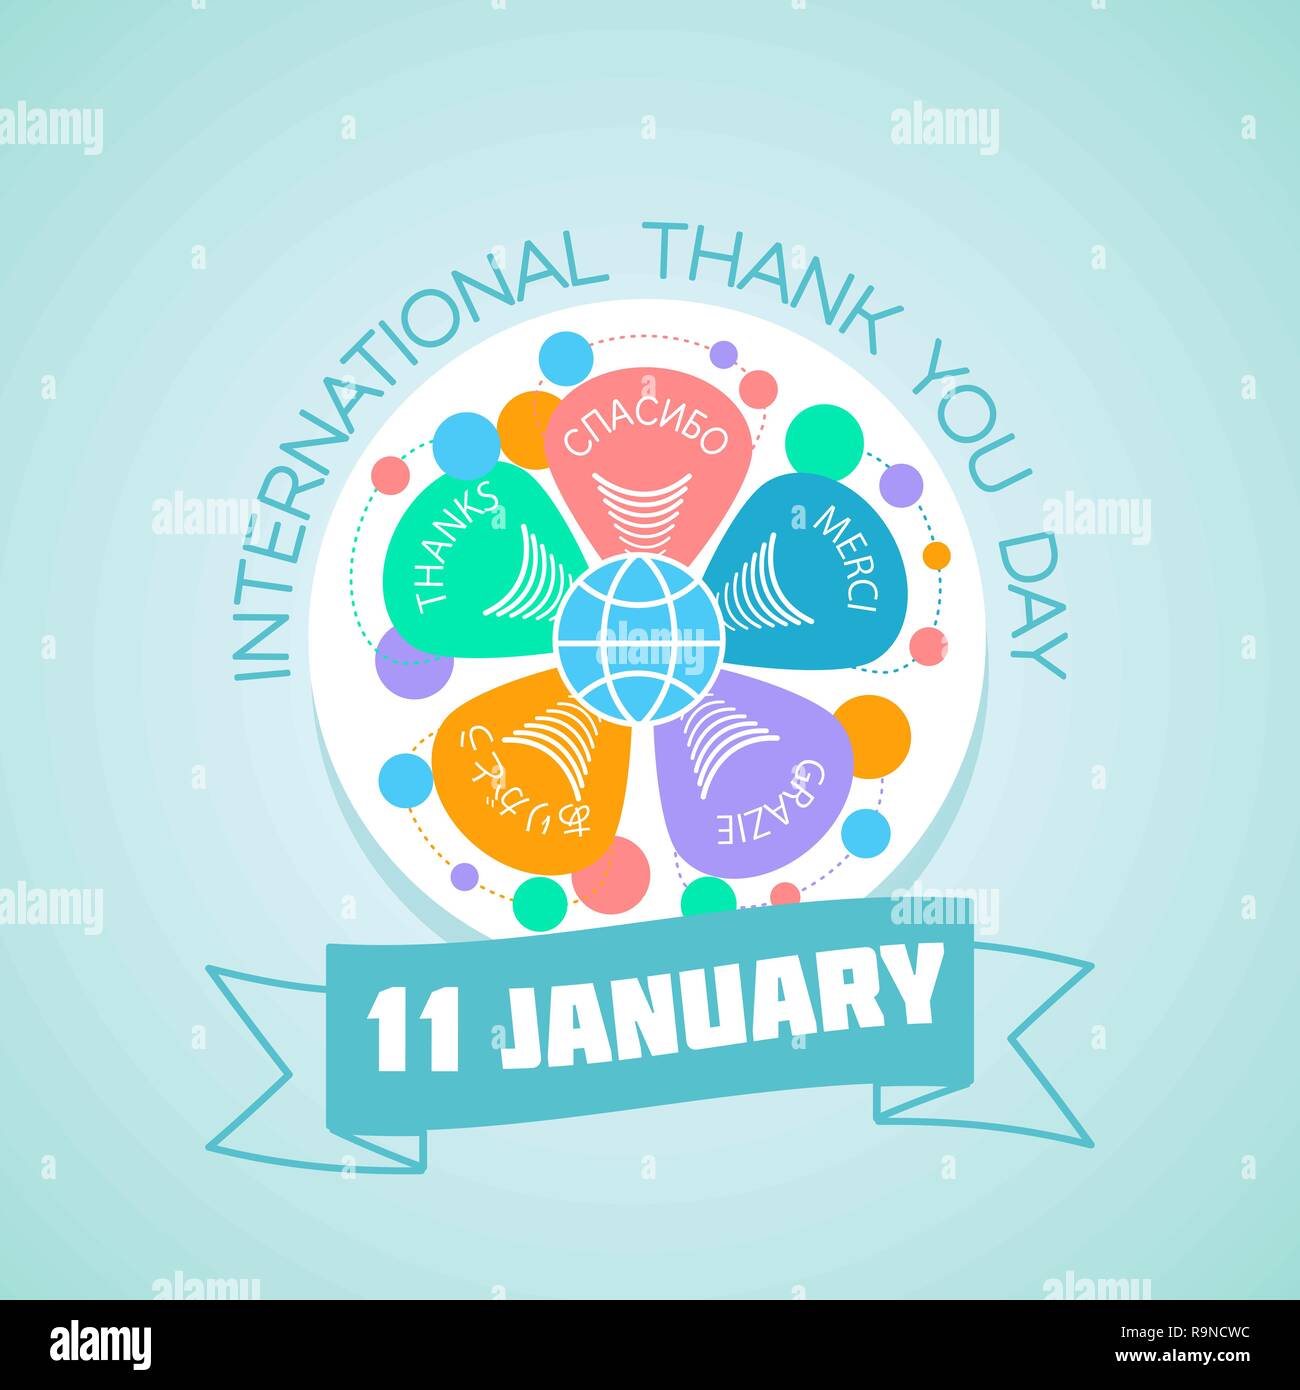 Calendar for each day on january 11. Greeting card. Holiday - International Thank You Day. Icon in the linear style Stock Vector